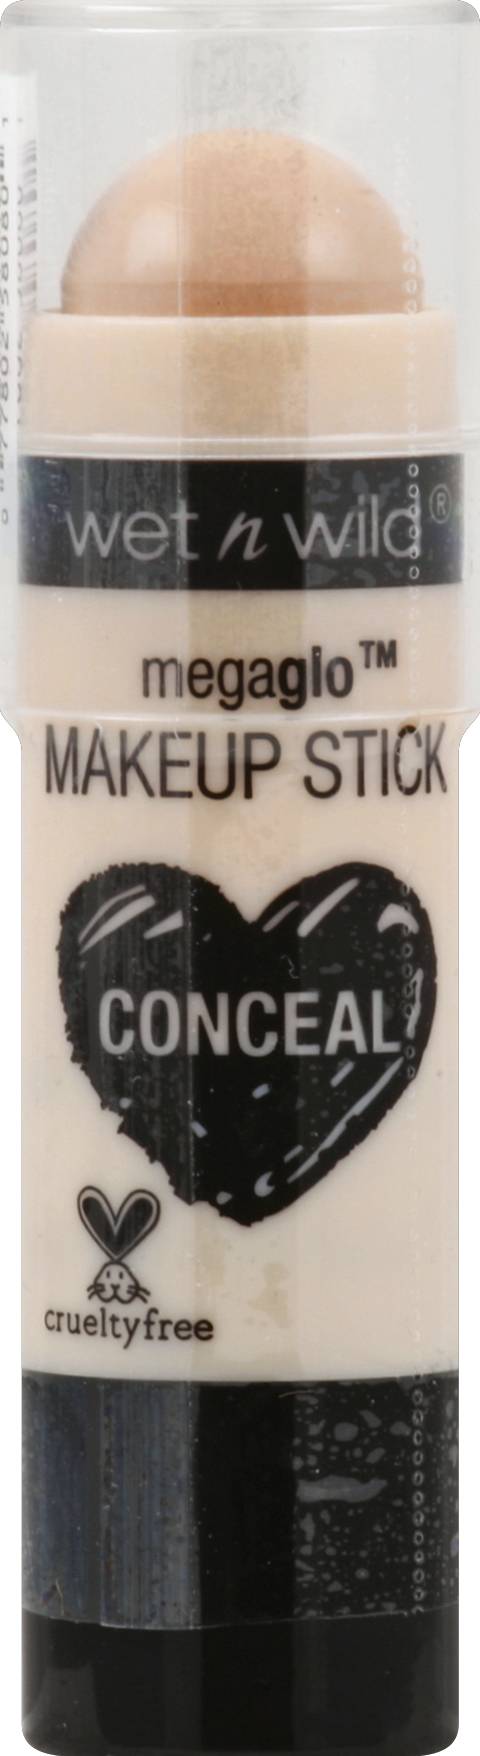 Wet N Wild Nude For Thought Conceal Makeup Stick